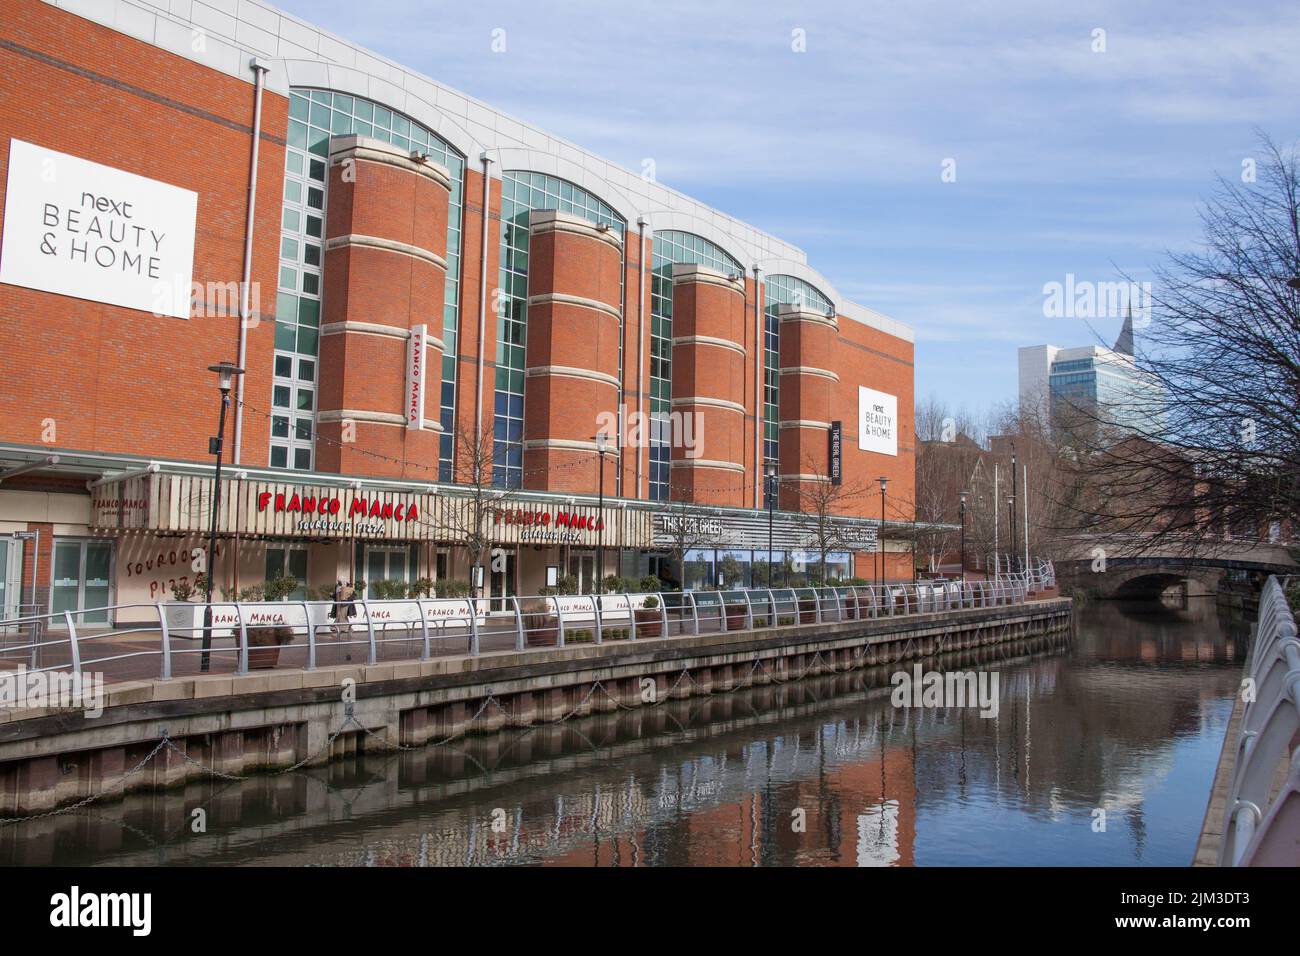 Views of The Oracle Shopping Centre in Reading, Berkshire in the UK Stock Photo